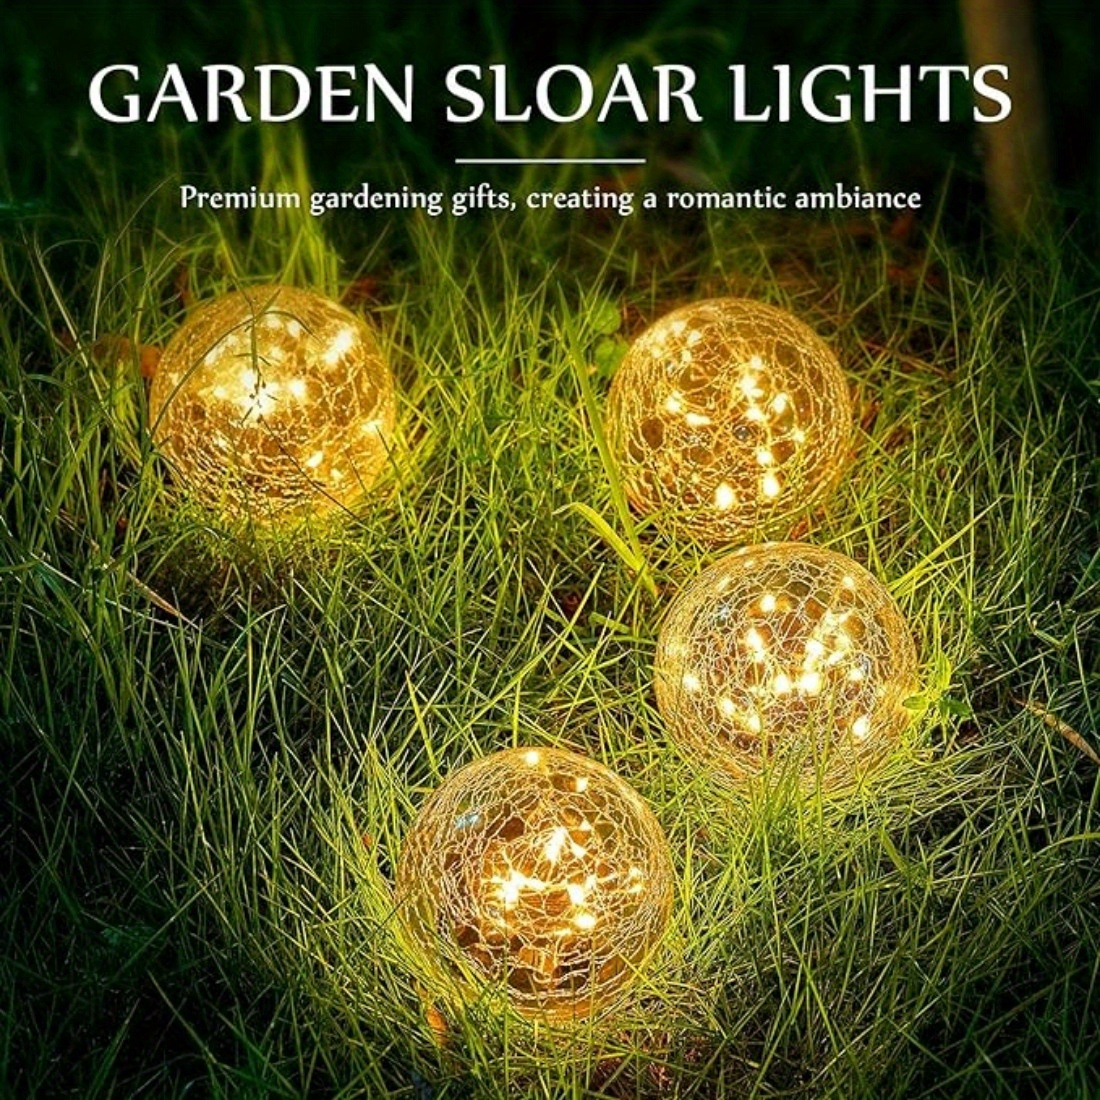 

Warm White Led - Cracked Glass Ball Design For Outdoor Pathway, Patio & Yard Decor - Energy-efficient With Easy Installation